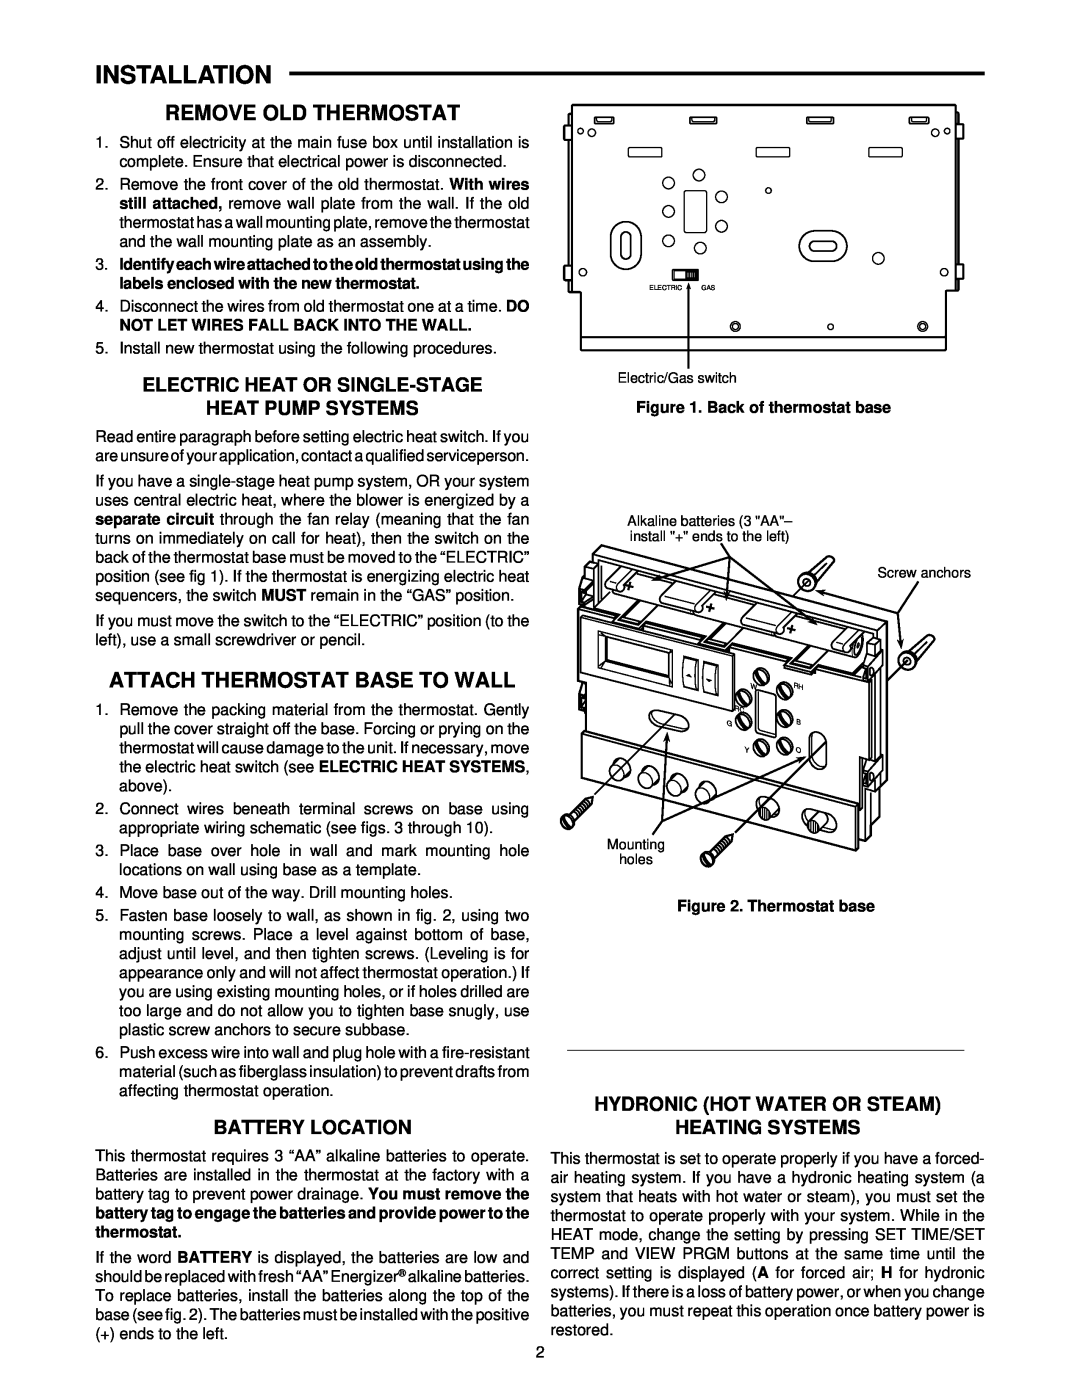 White Rodgers 1F87-51 specifications Installation, Remove Old Thermostat, Attach Thermostat Base To Wall, Battery Location 